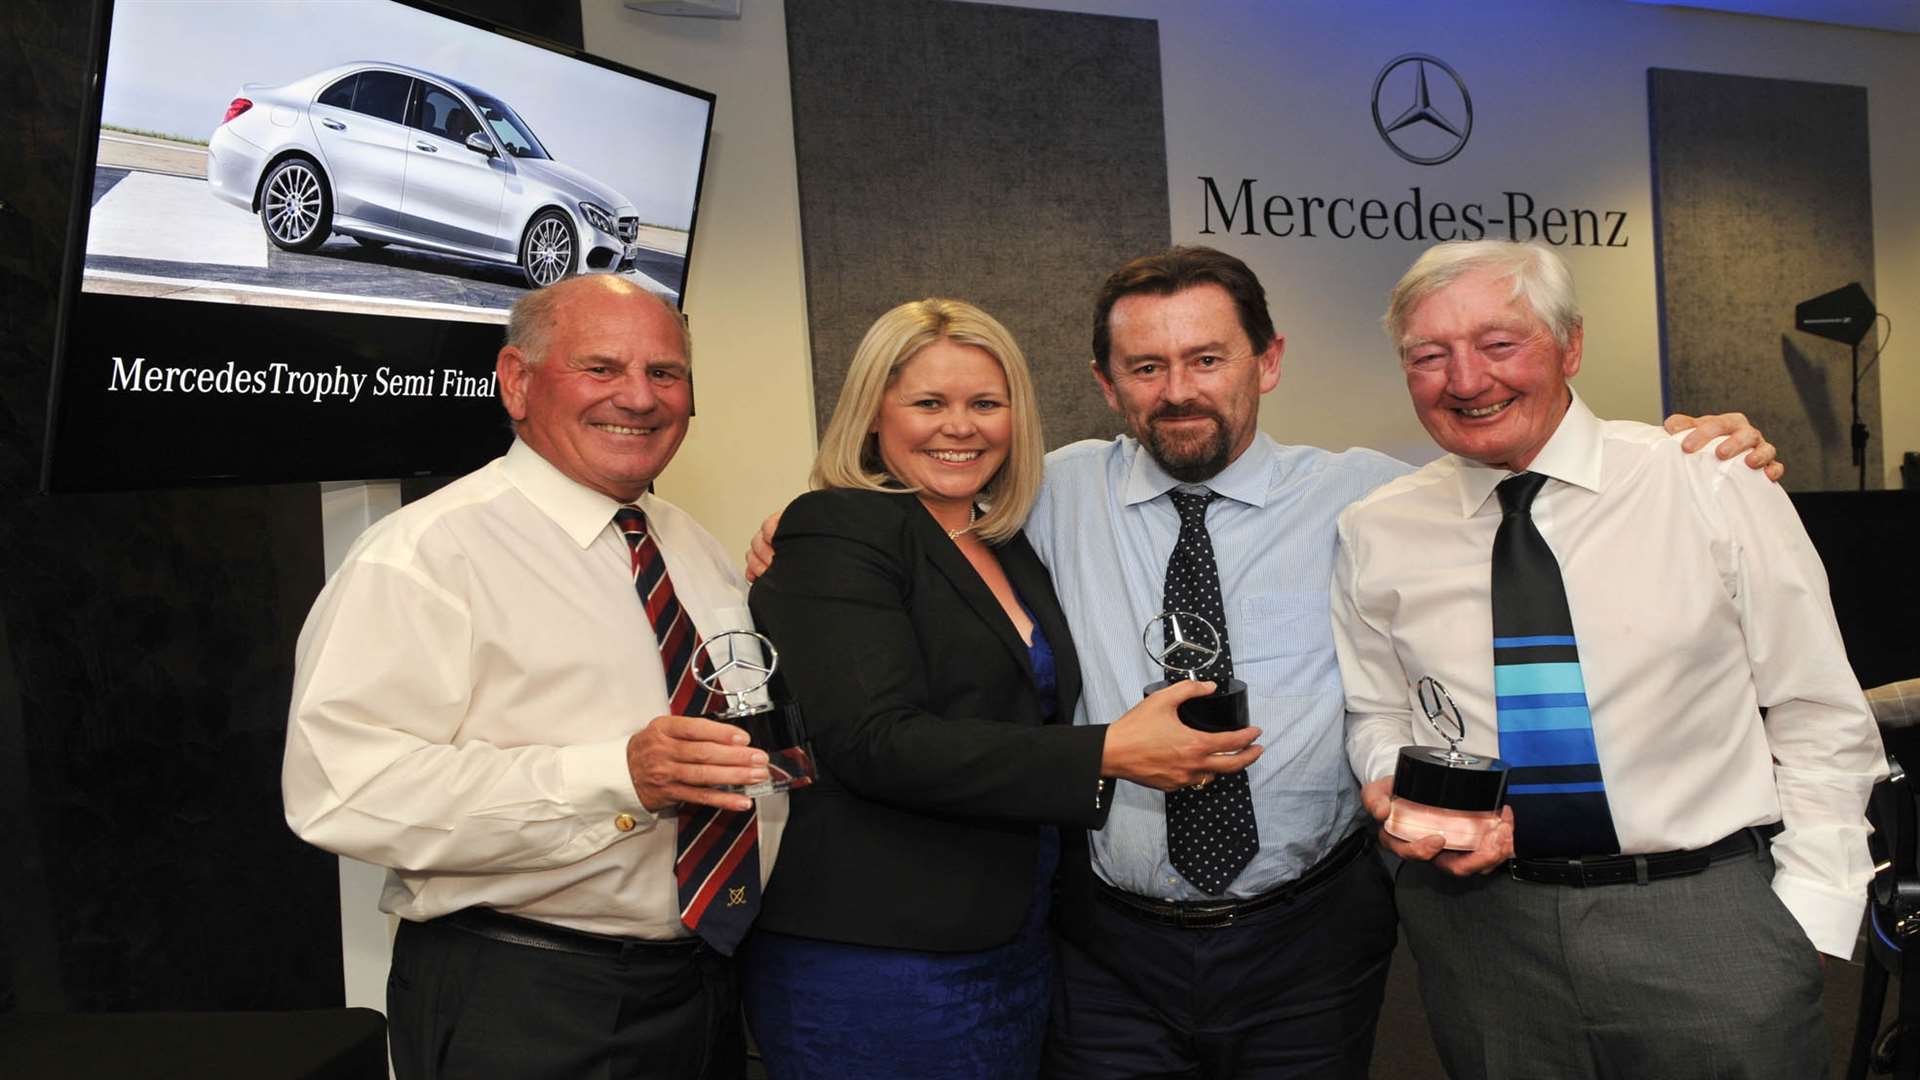 Keith Andrews (left) and Malcolm Wager (second right) are pictured being presented with their prizes at the MercedesTrophy southern semi-final